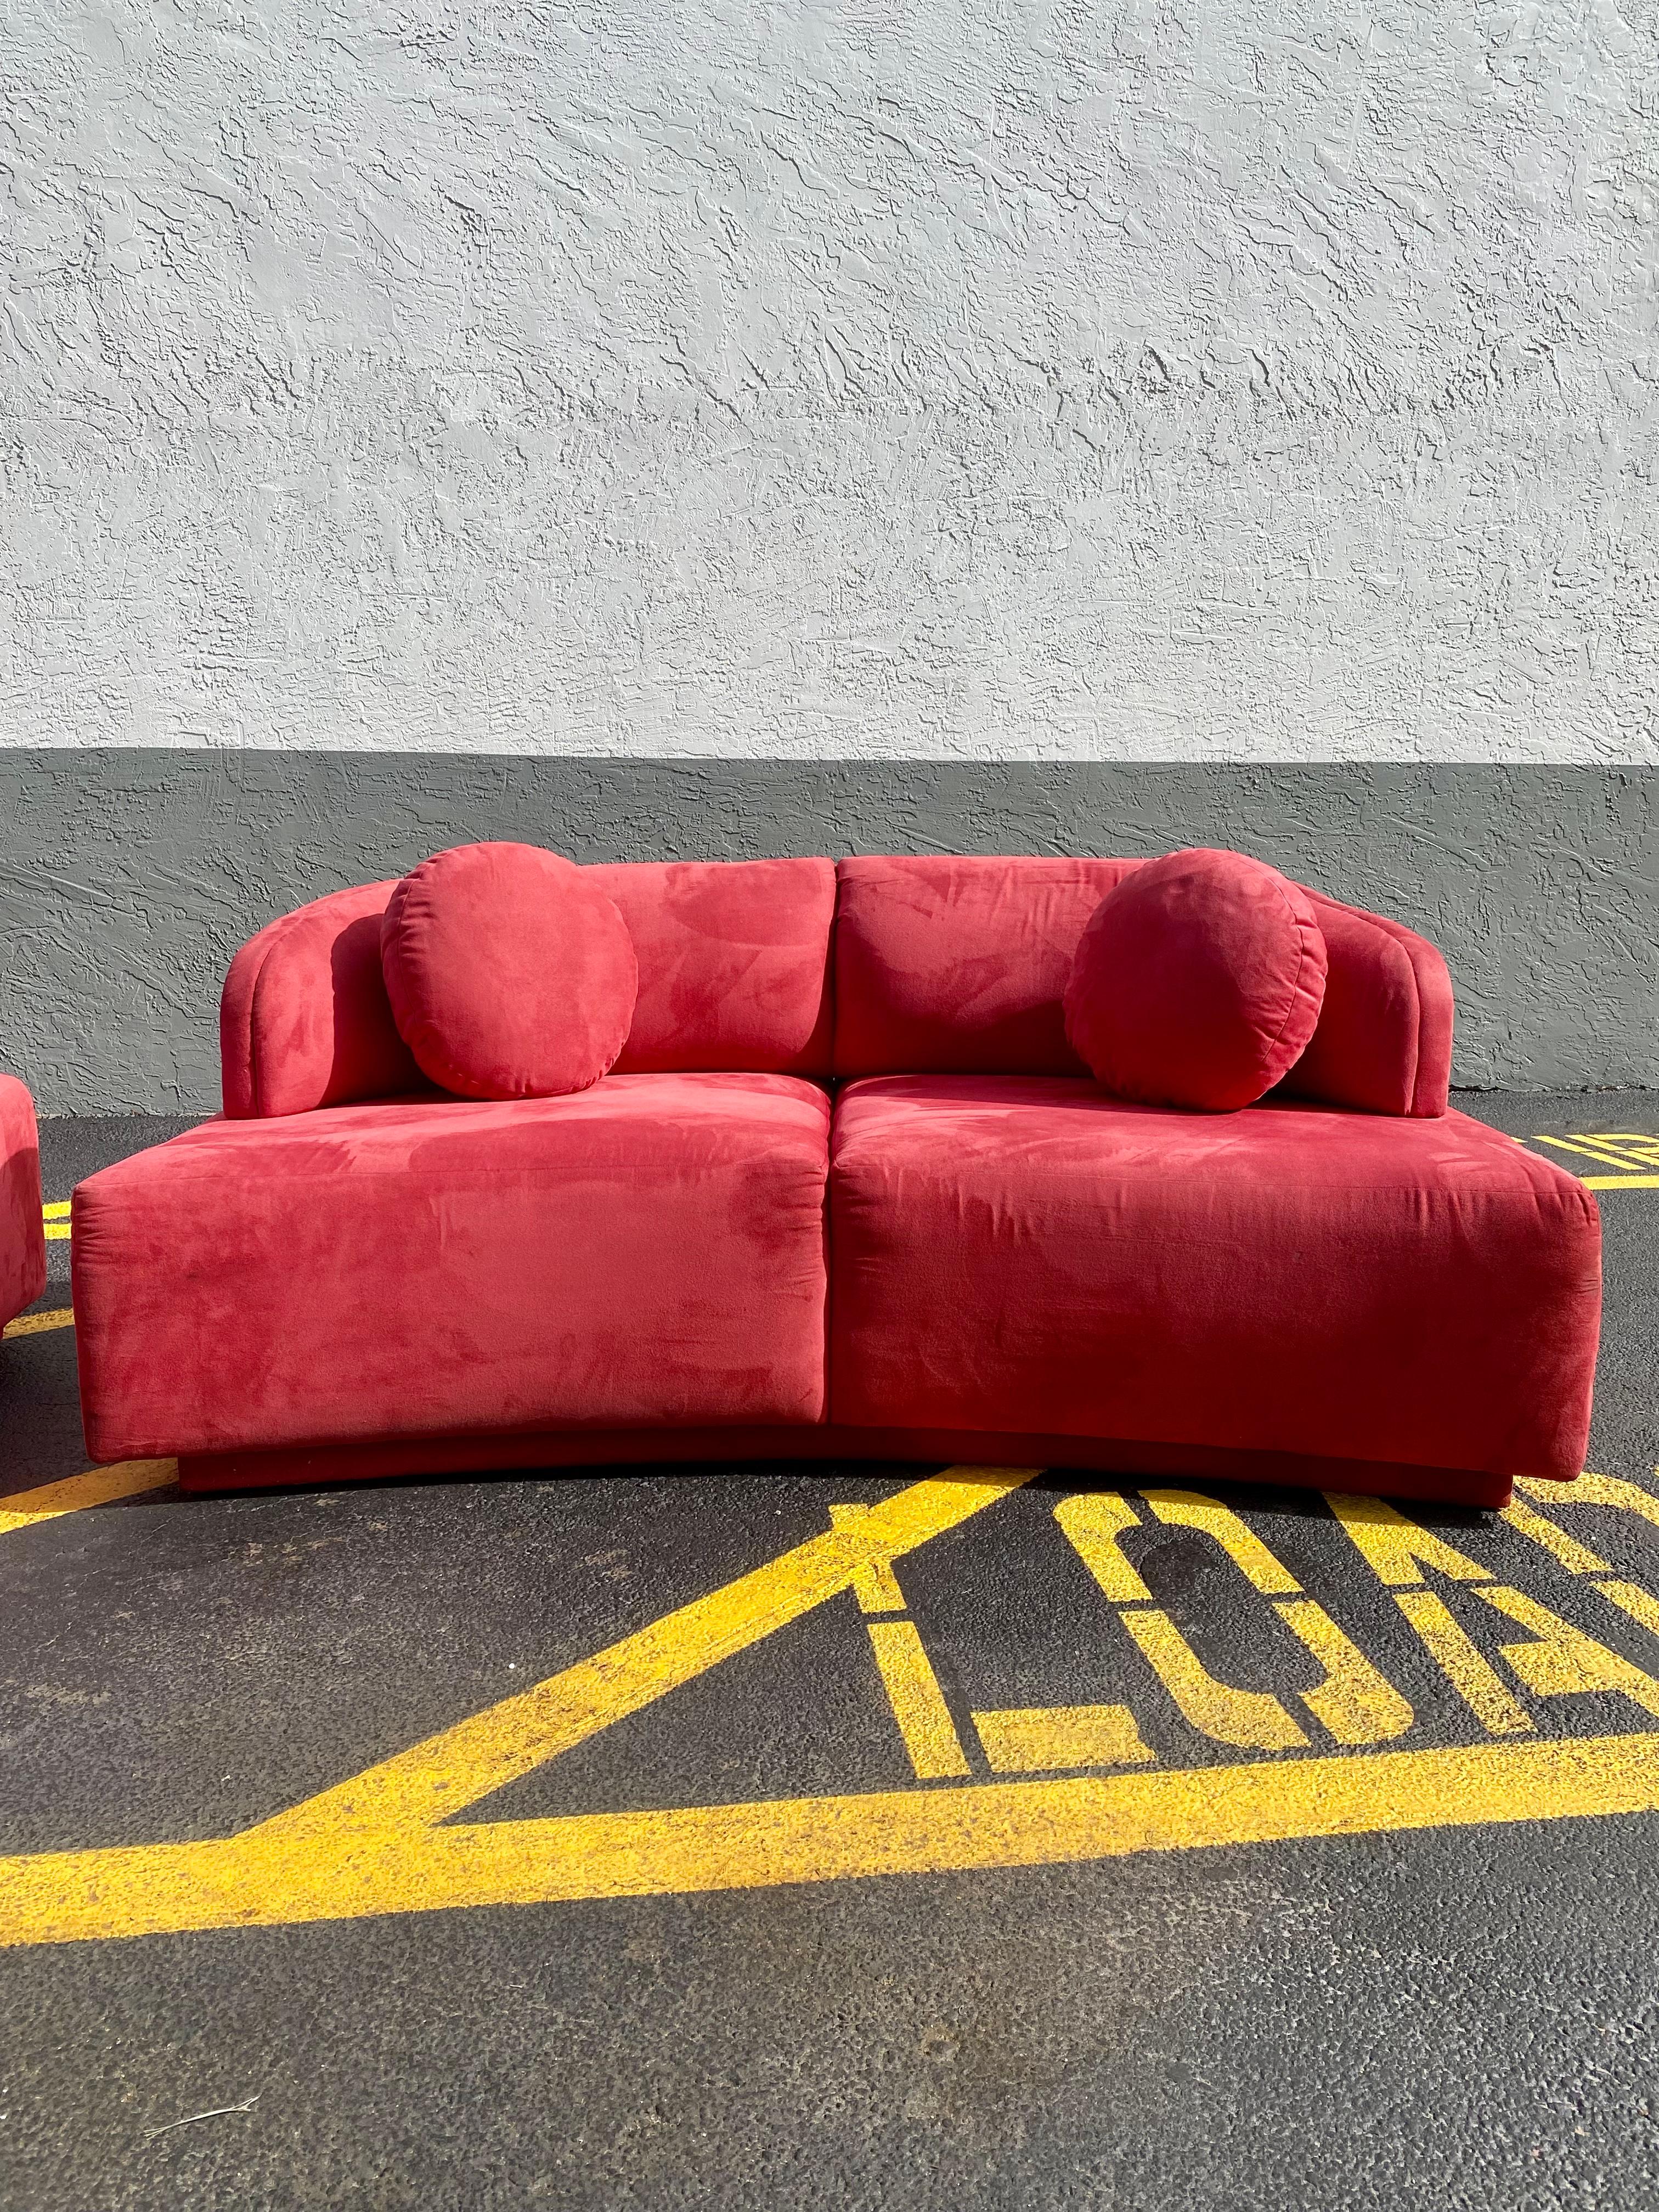 American 1980s Sculptural Weiman Red Cloud Sofa Loveseat, Set of 2 For Sale